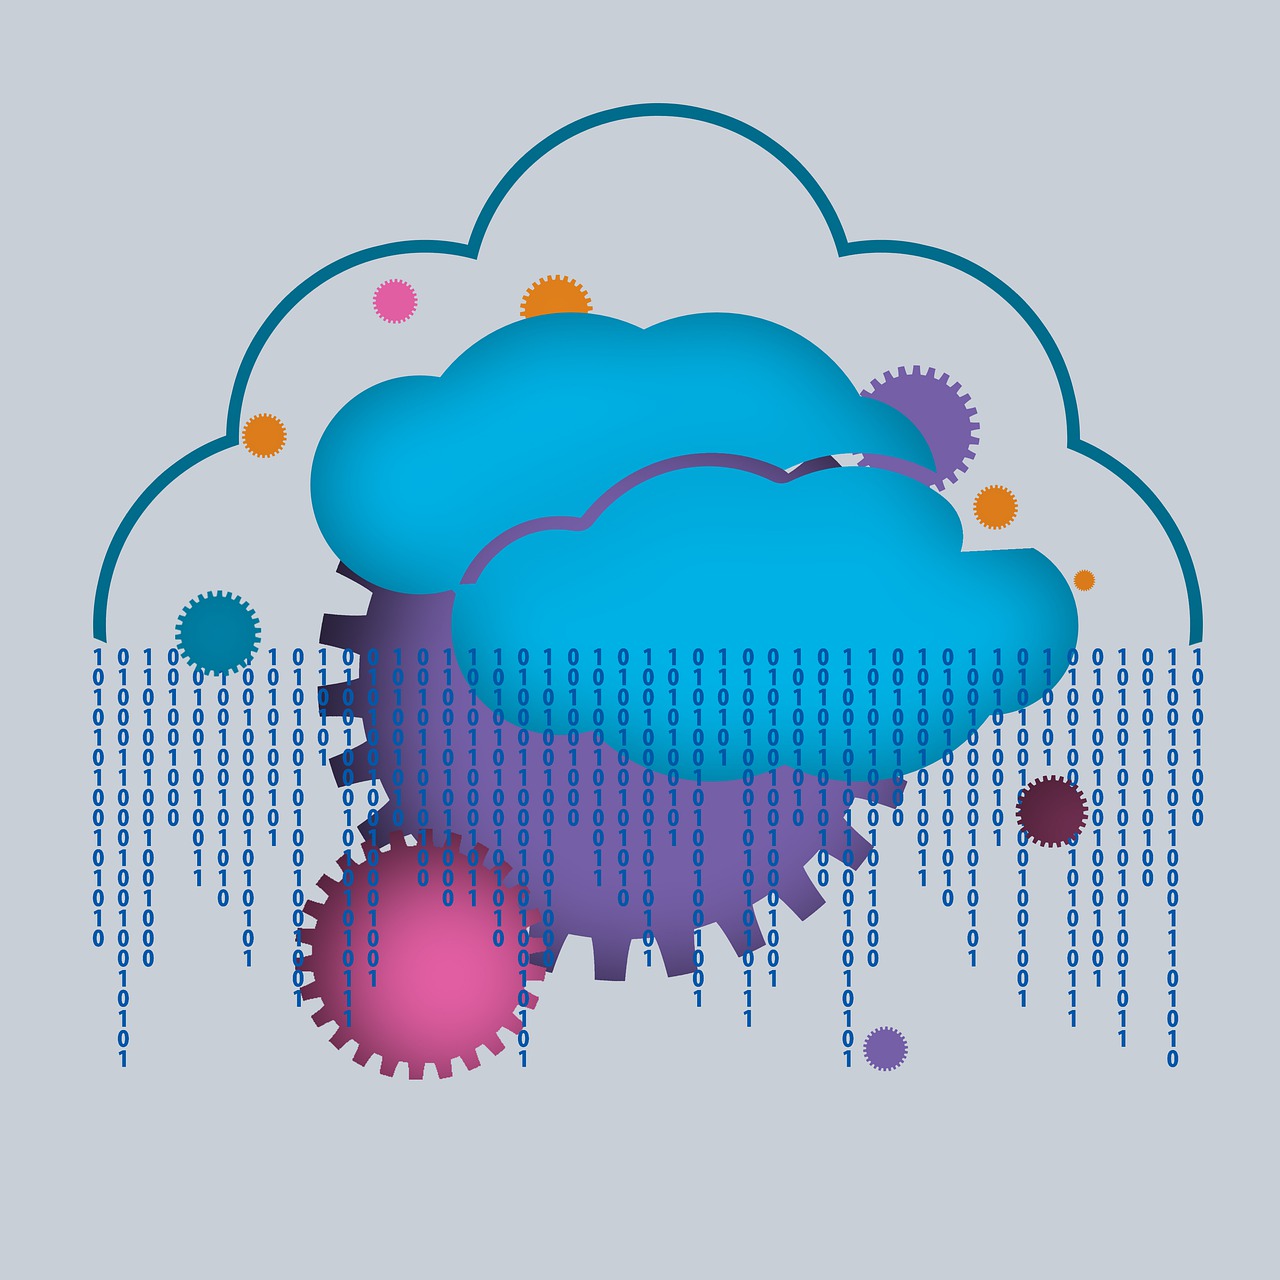 Risks, Threats, and Security Challenges Posed in Moving to the Cloud